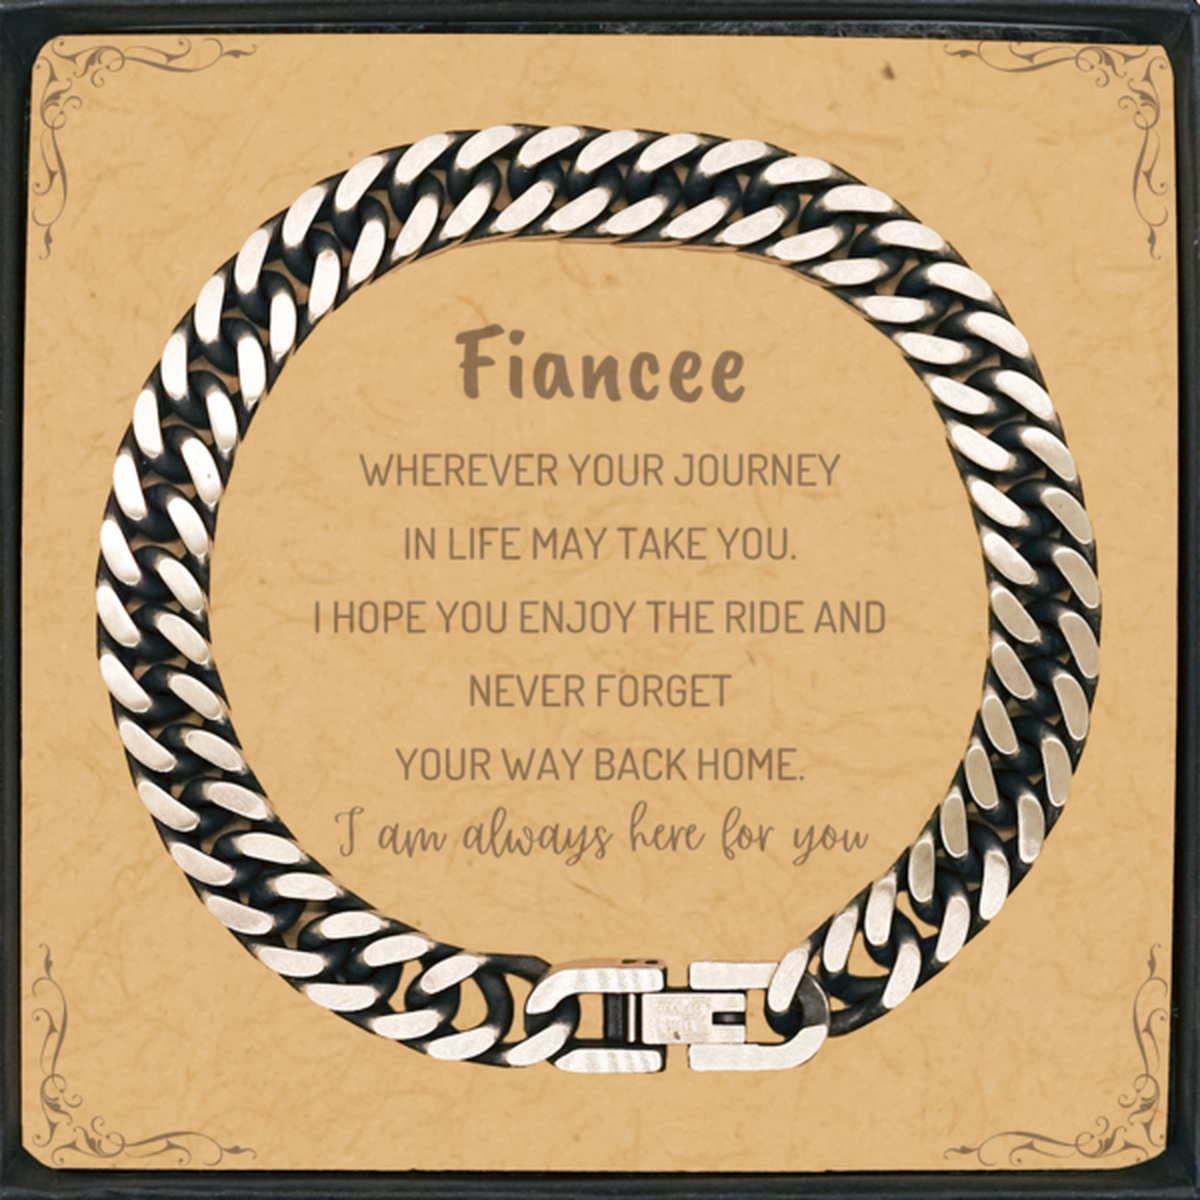 Fiancee wherever your journey in life may take you, I am always here for you Fiancee Cuban Link Chain Bracelet, Awesome Christmas Gifts For Fiancee Message Card, Fiancee Birthday Gifts for Men Women Family Loved One